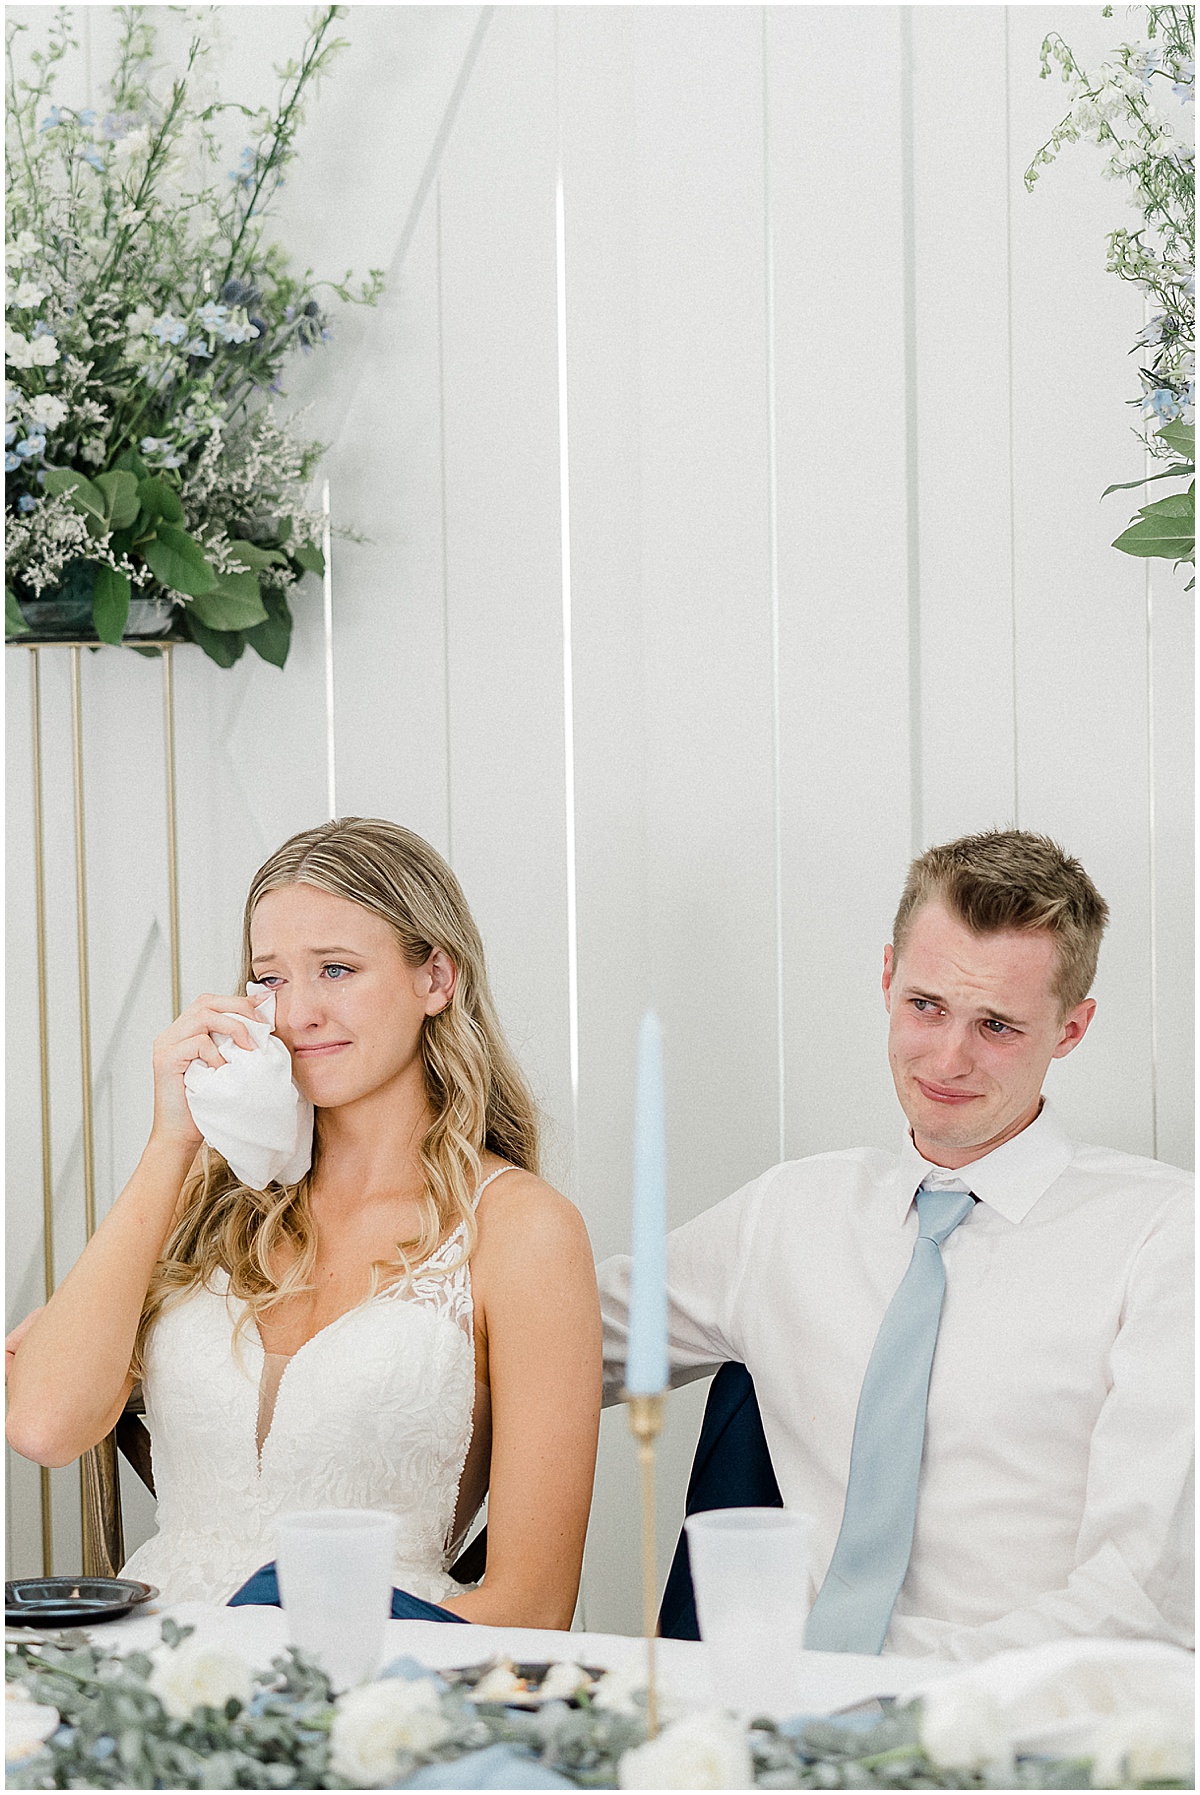 A Wedding at The Sixpence in Whitestown, Indiana was captured by Kaitlin Mendoza Photography.